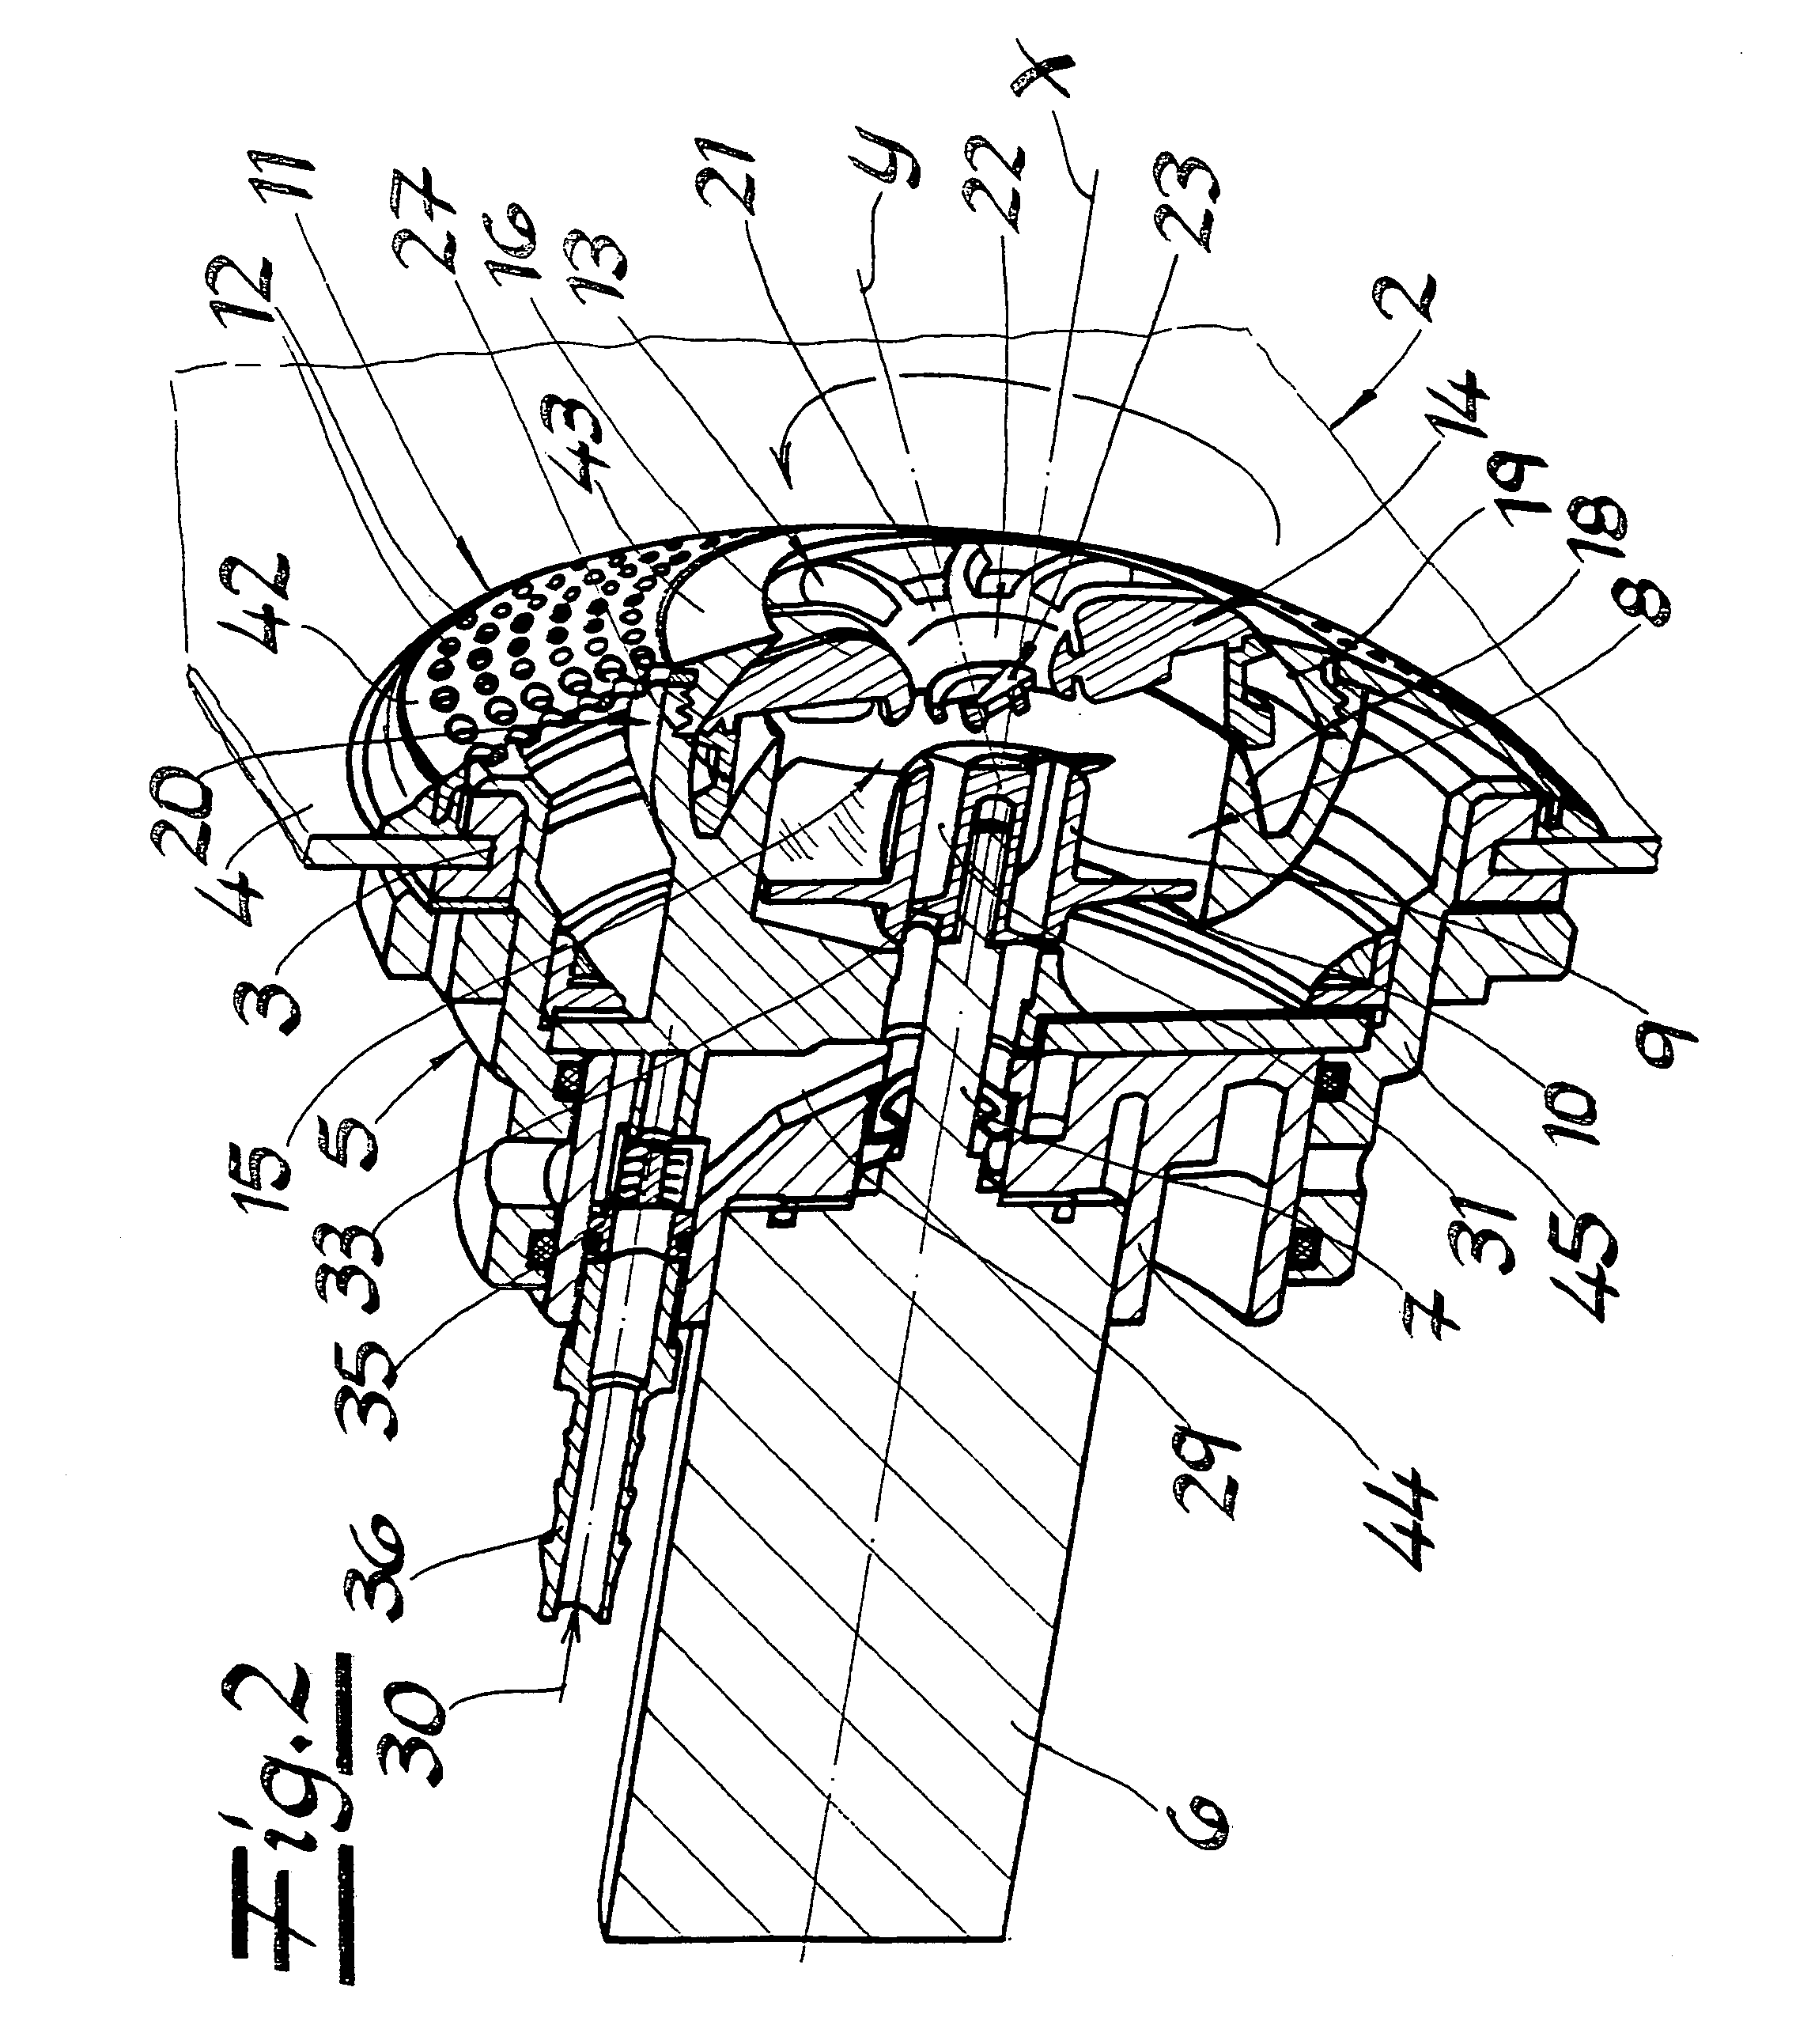 Device for generating a massage stream in a sanitary tub